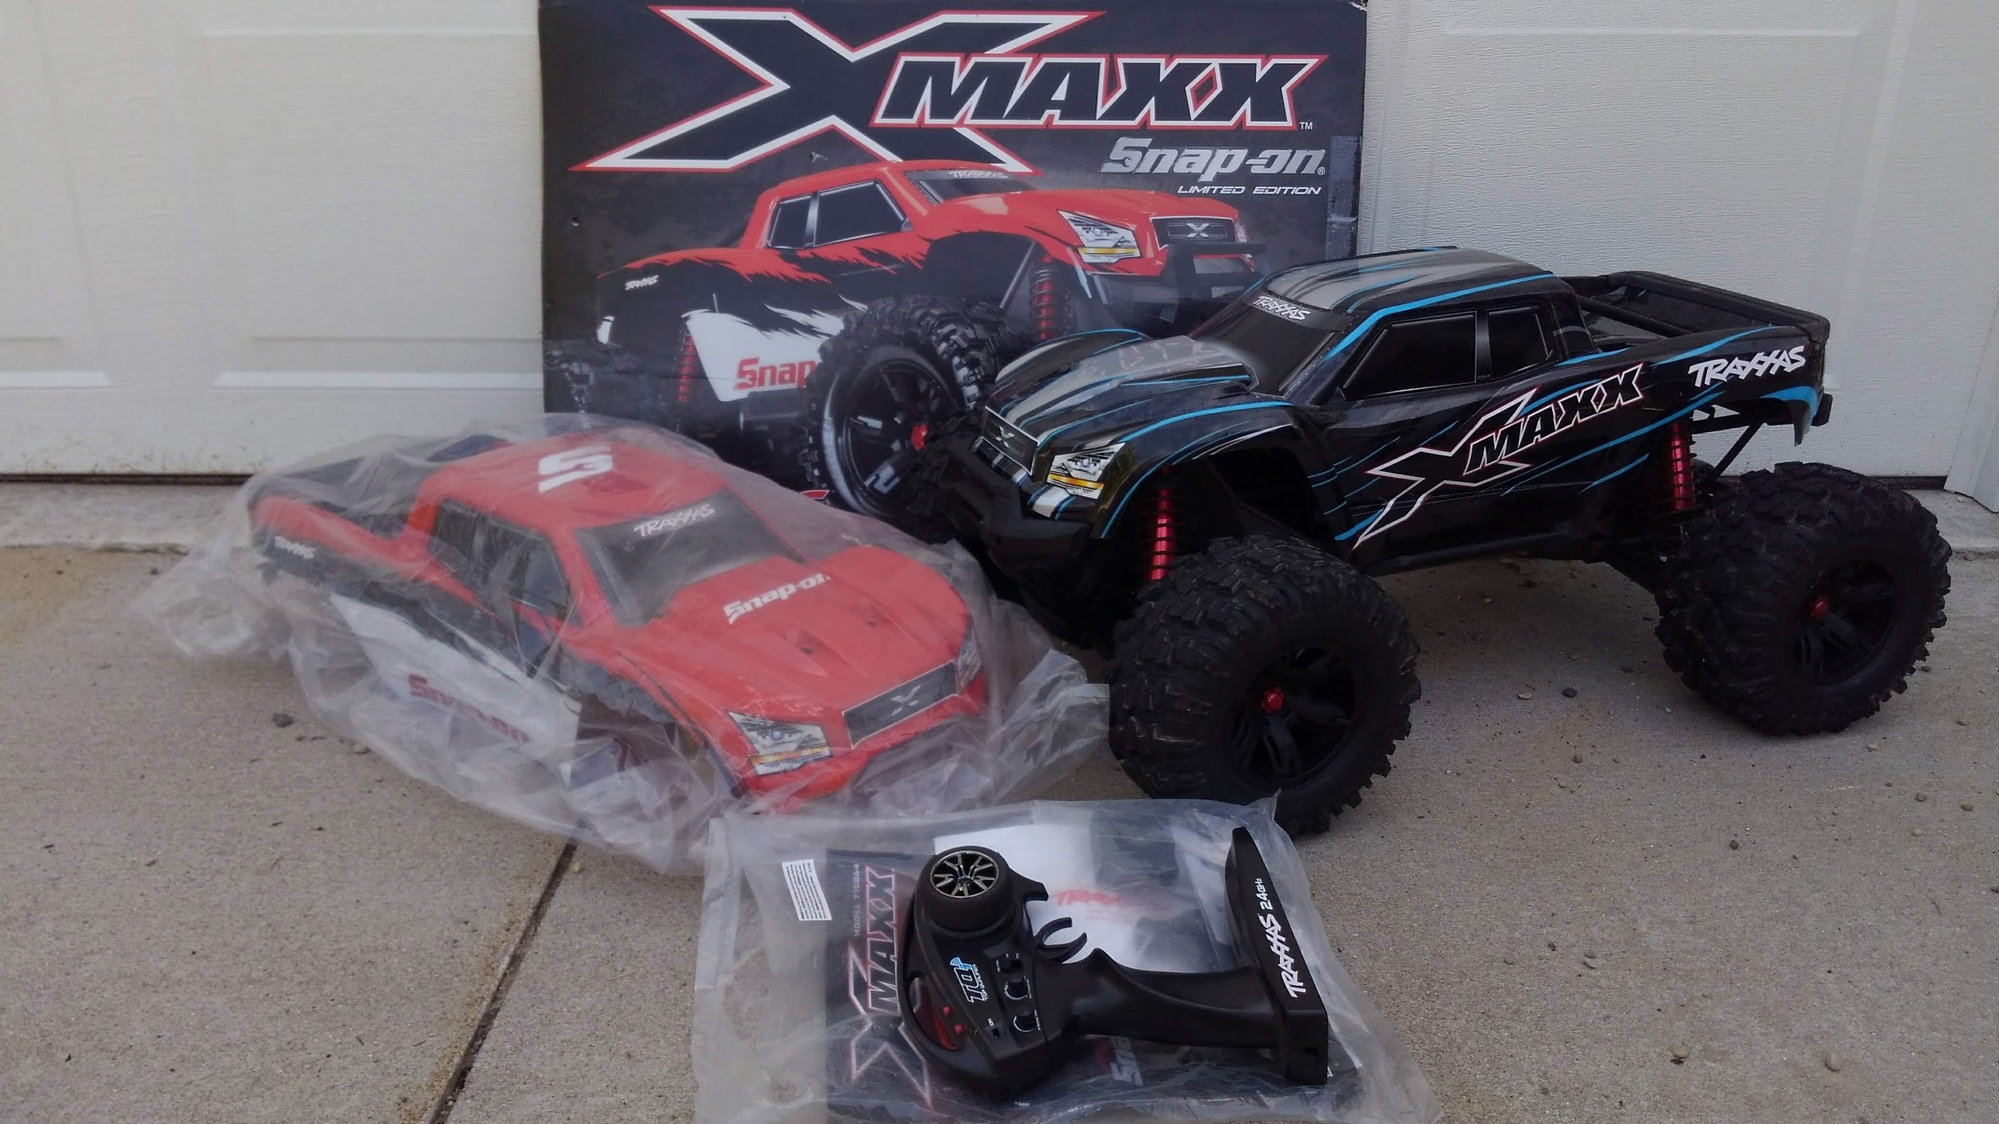 traxxas snap on tool truck for sale